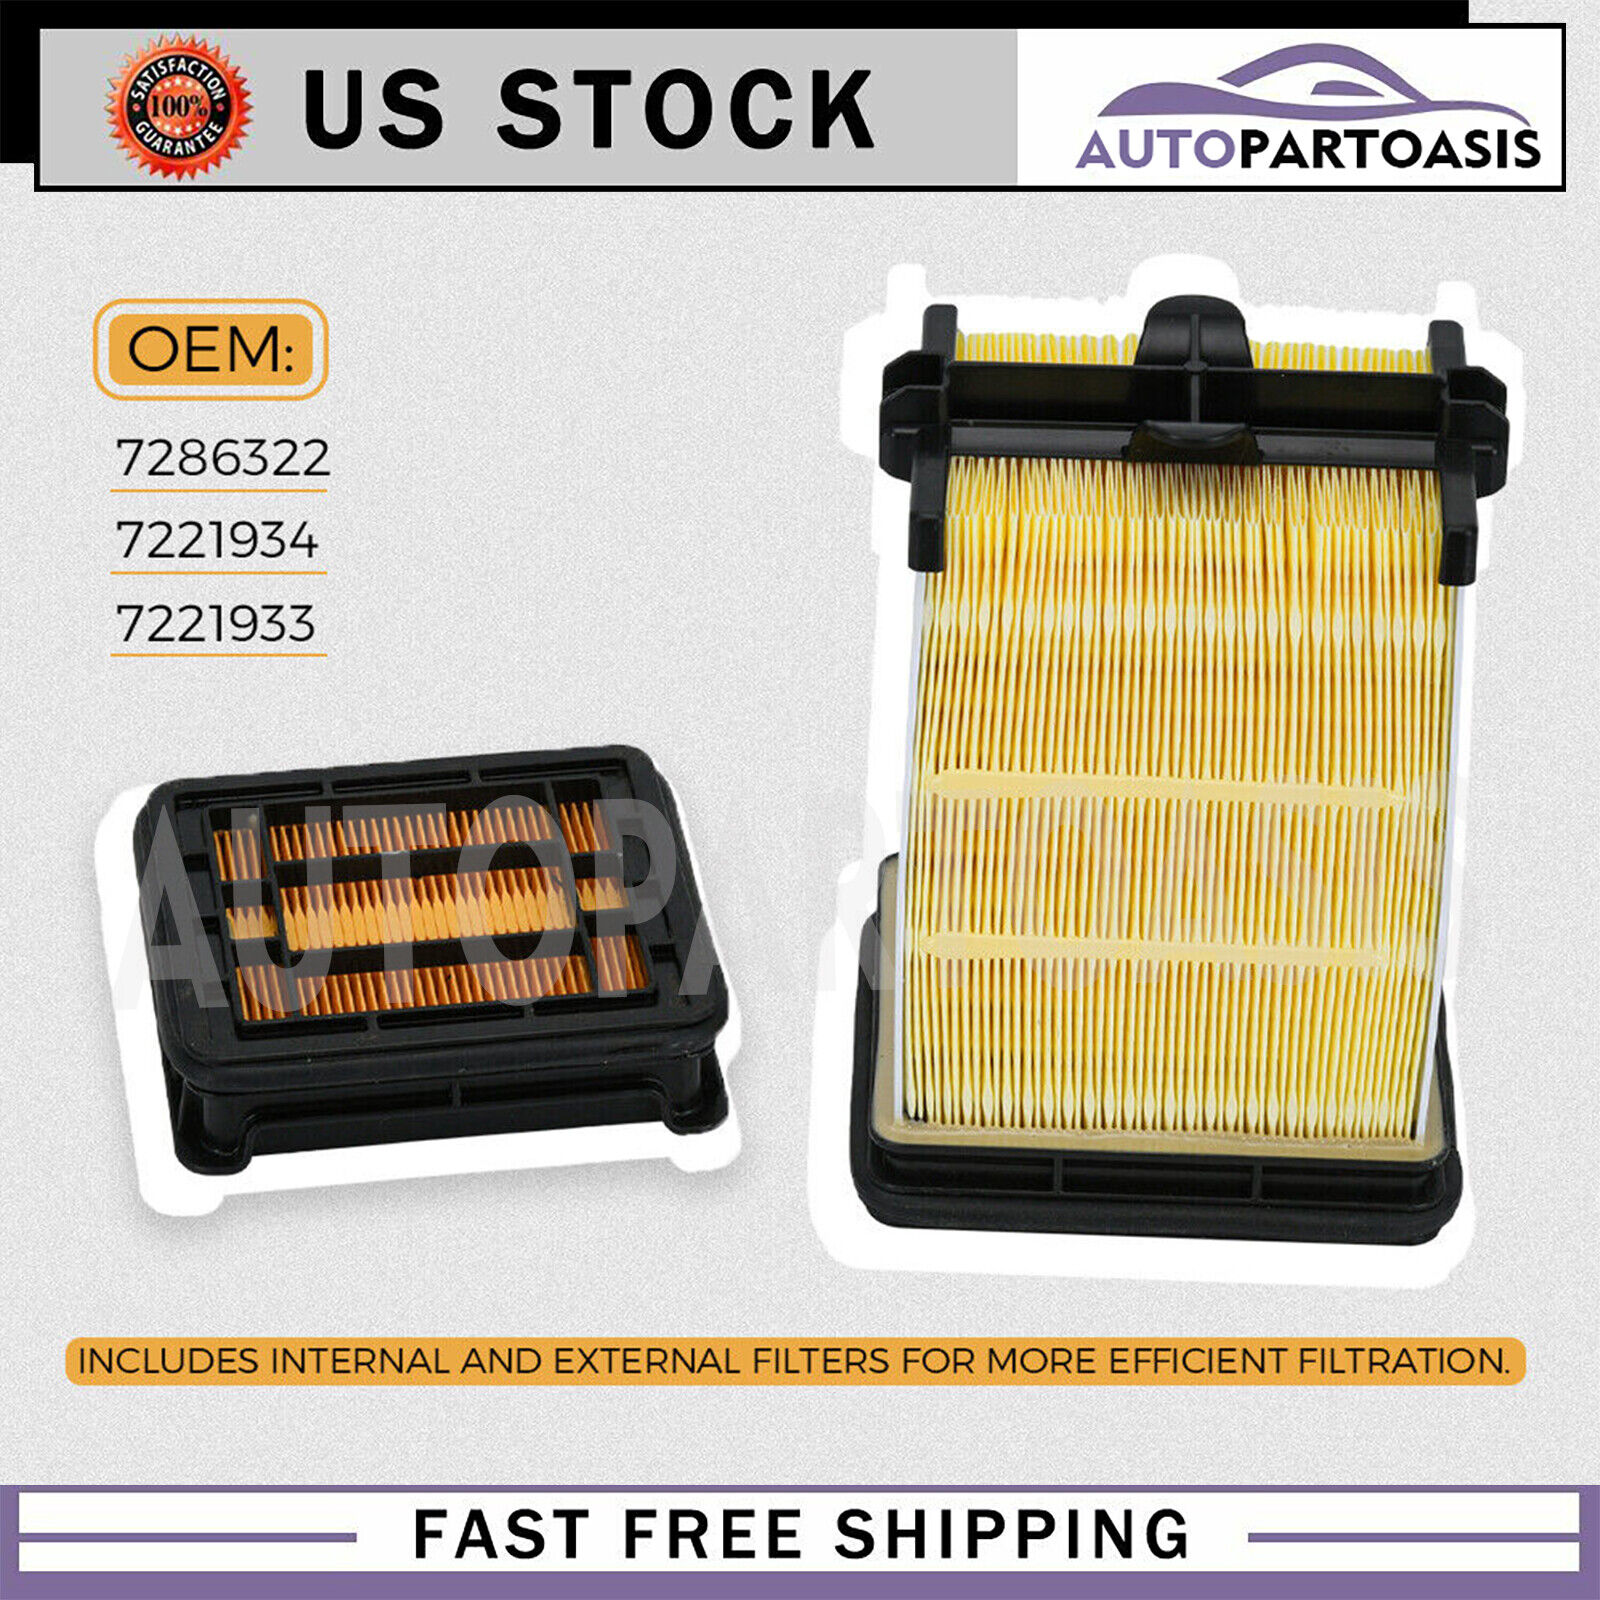 7286322 7221934 Air Filter Kit Compatible With Bobcat S570 S590 S650 T590 T630